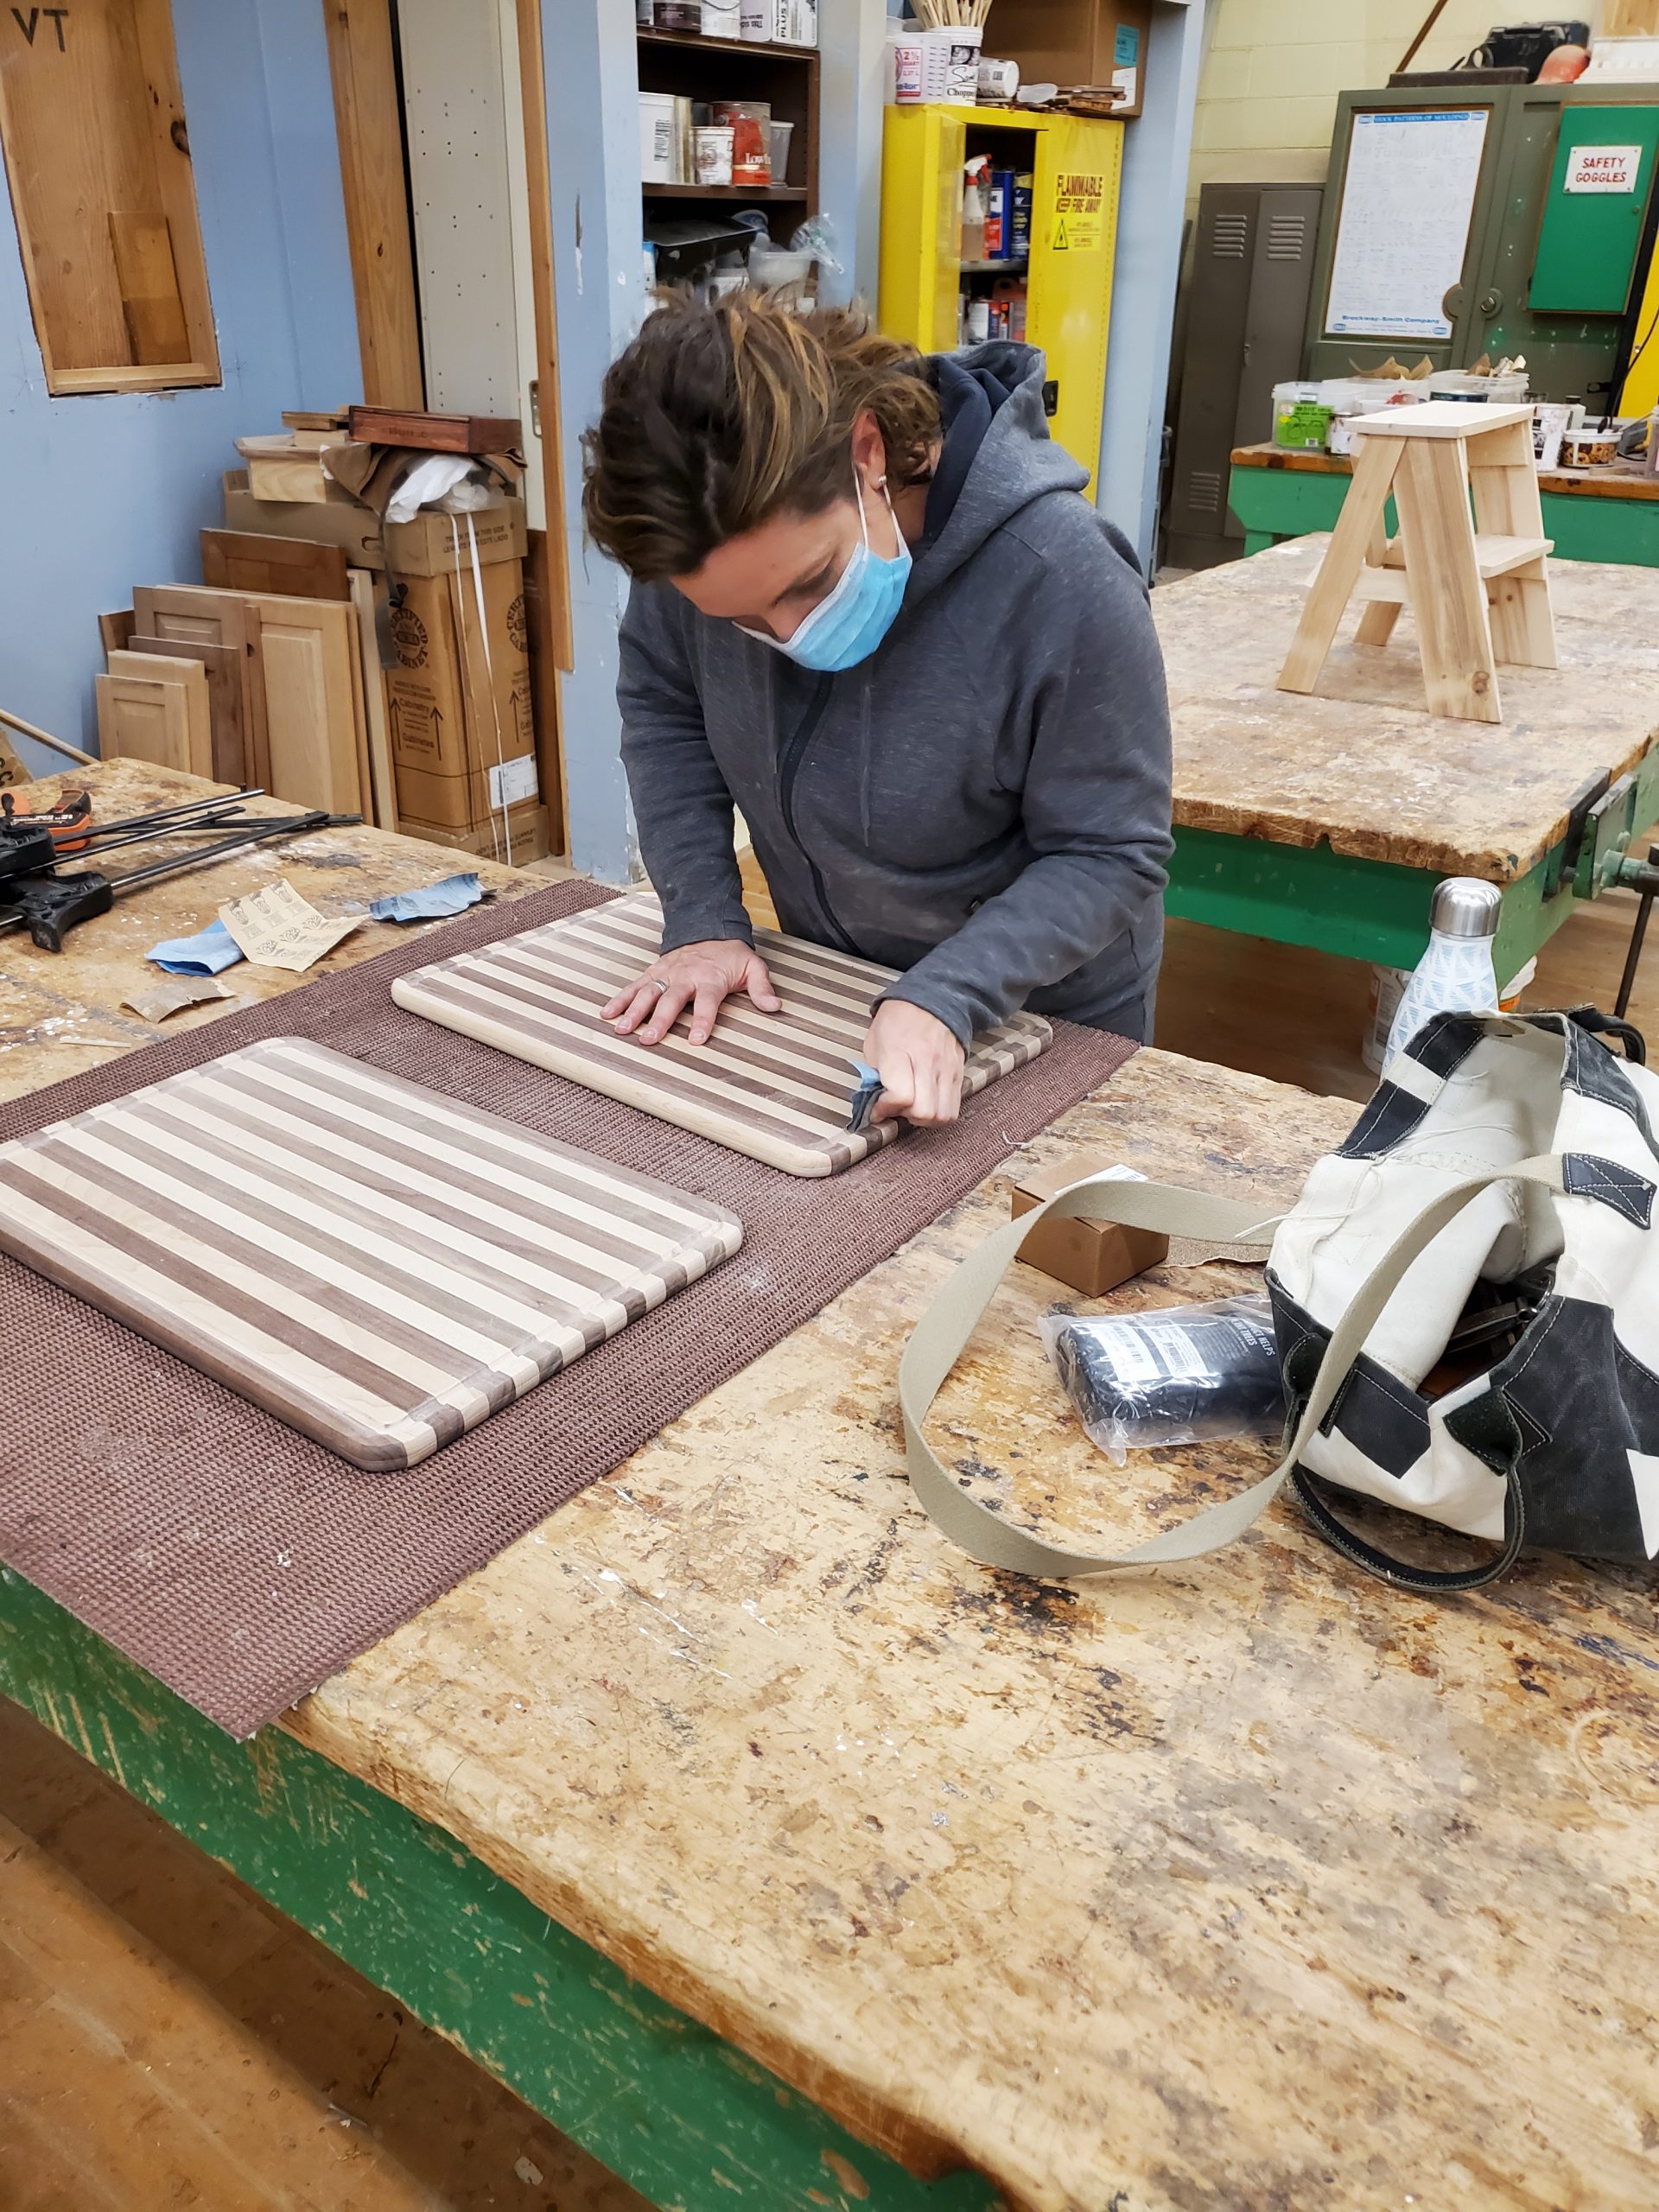 fine woodworking class woman works on duplicating a cutting board